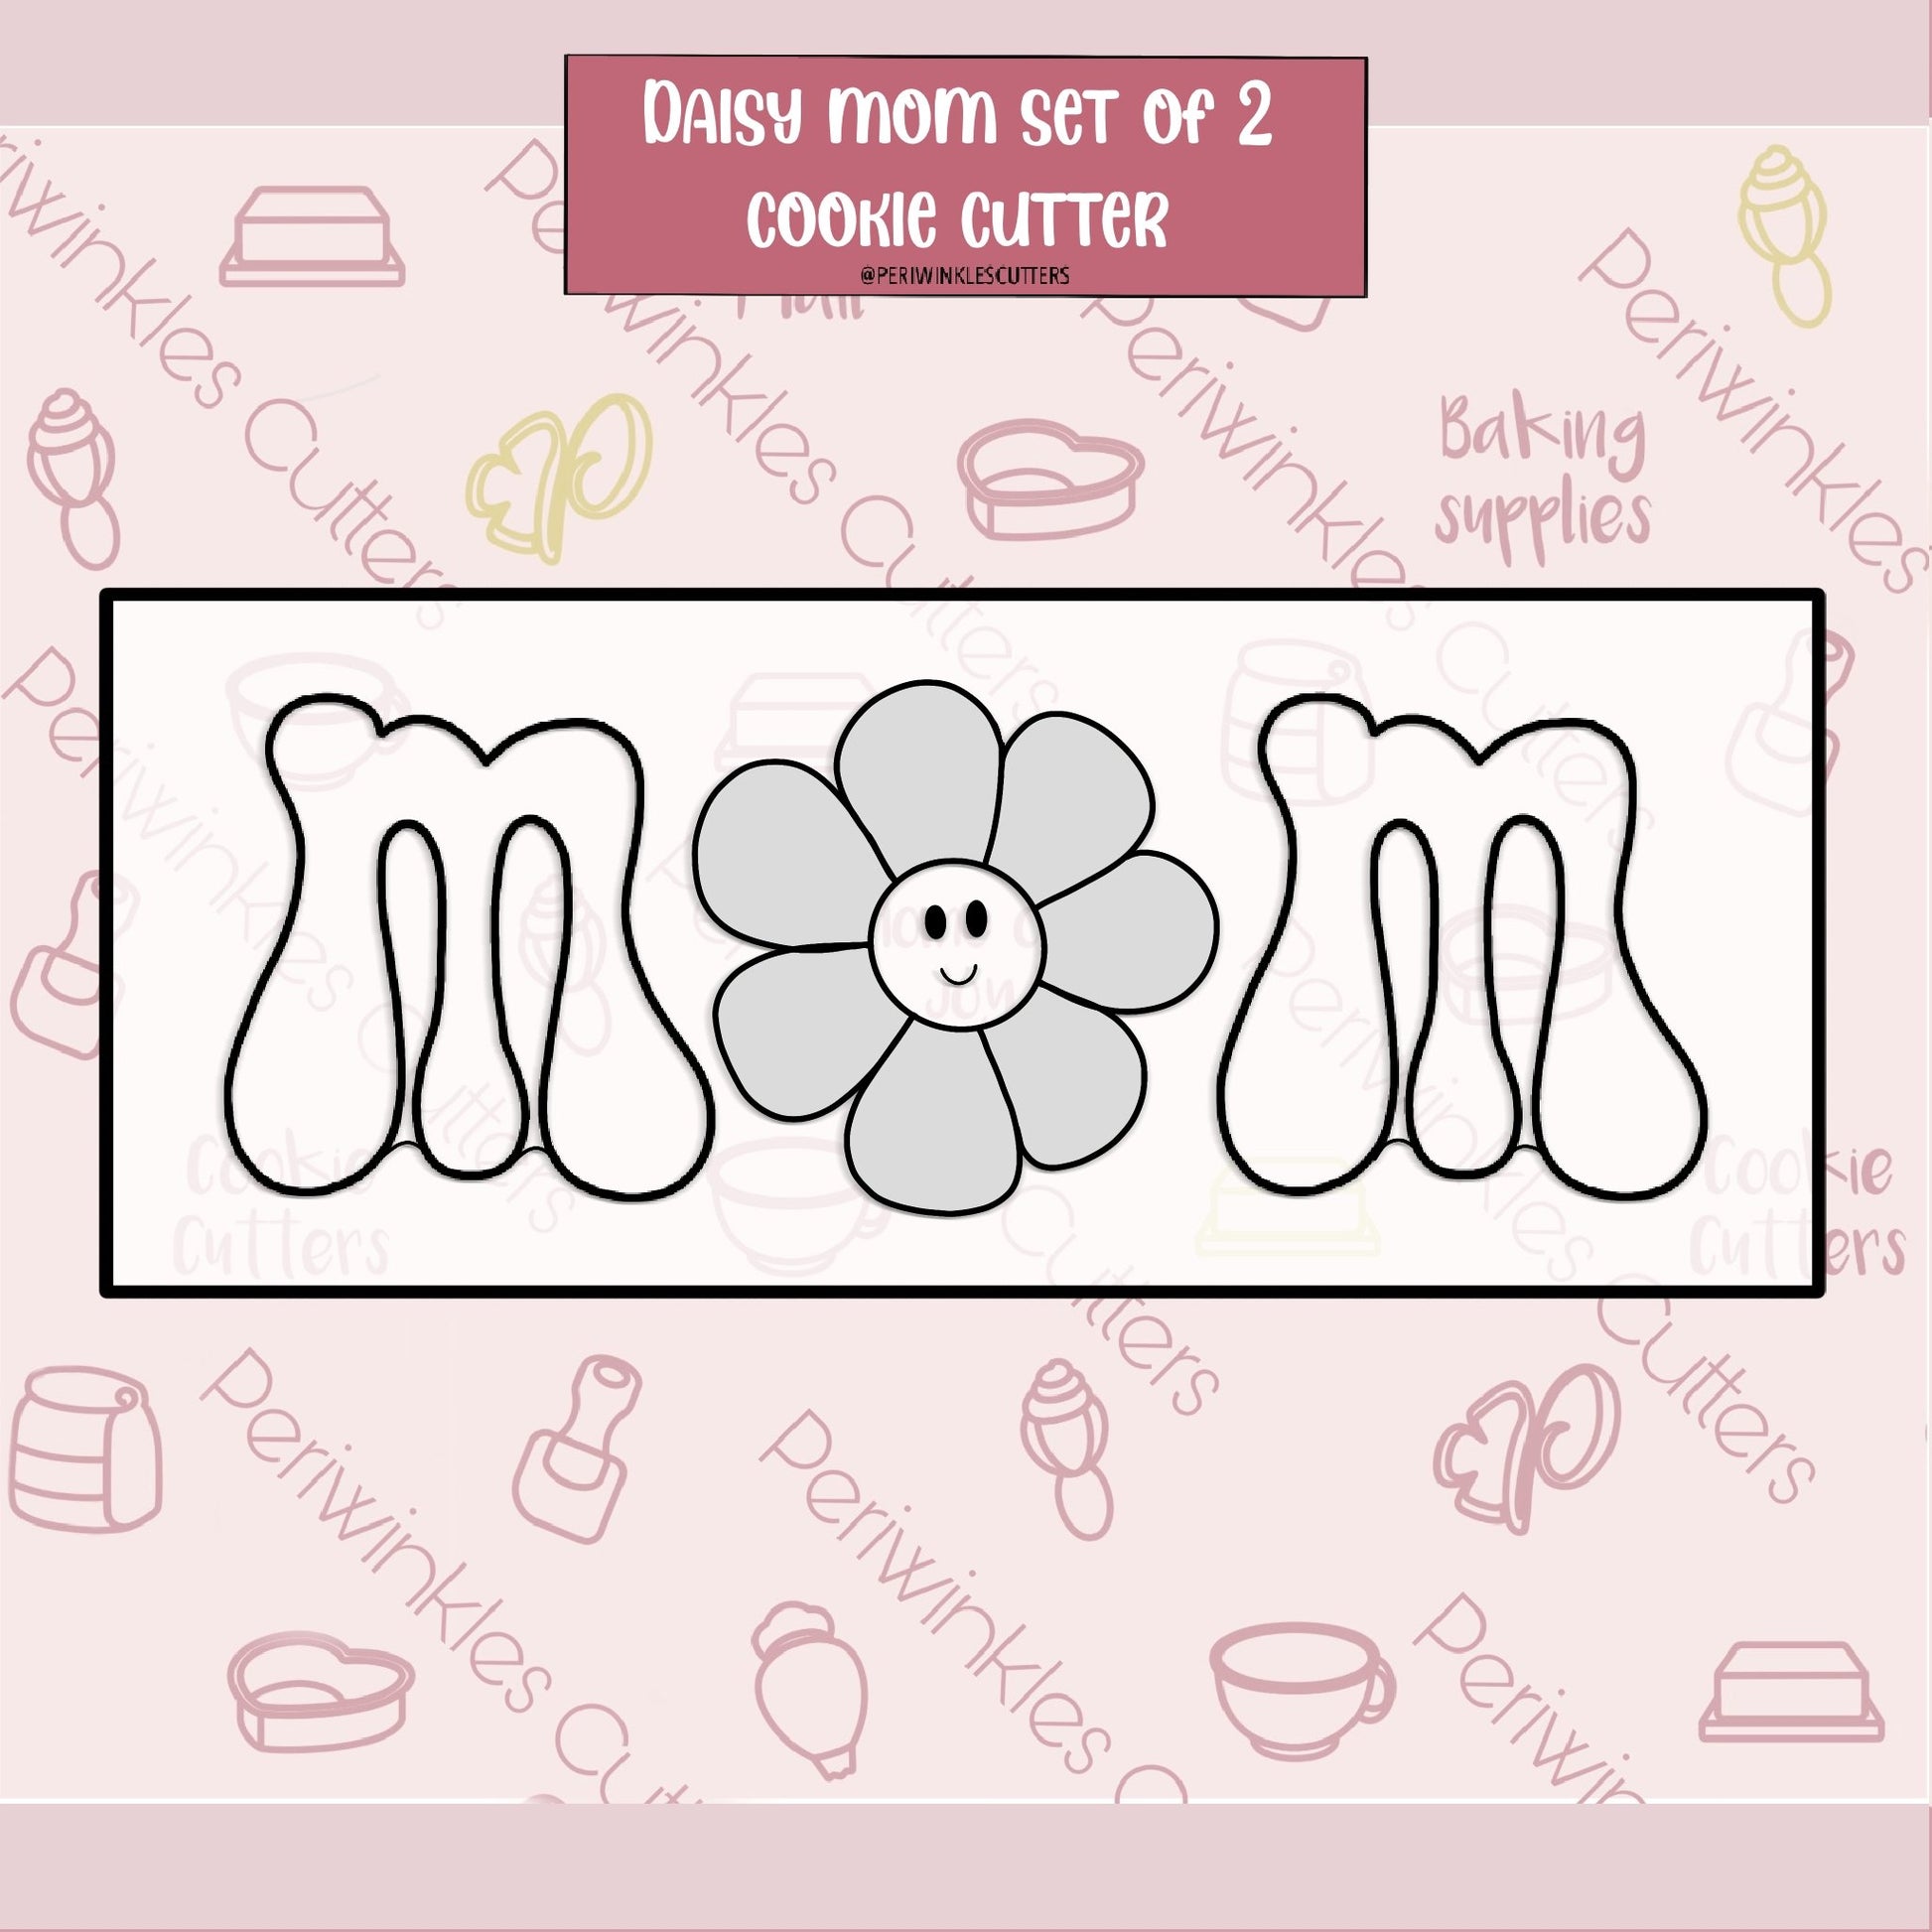 Daisy MOM Set of 2 Cookie Cutter - Periwinkles Cutters